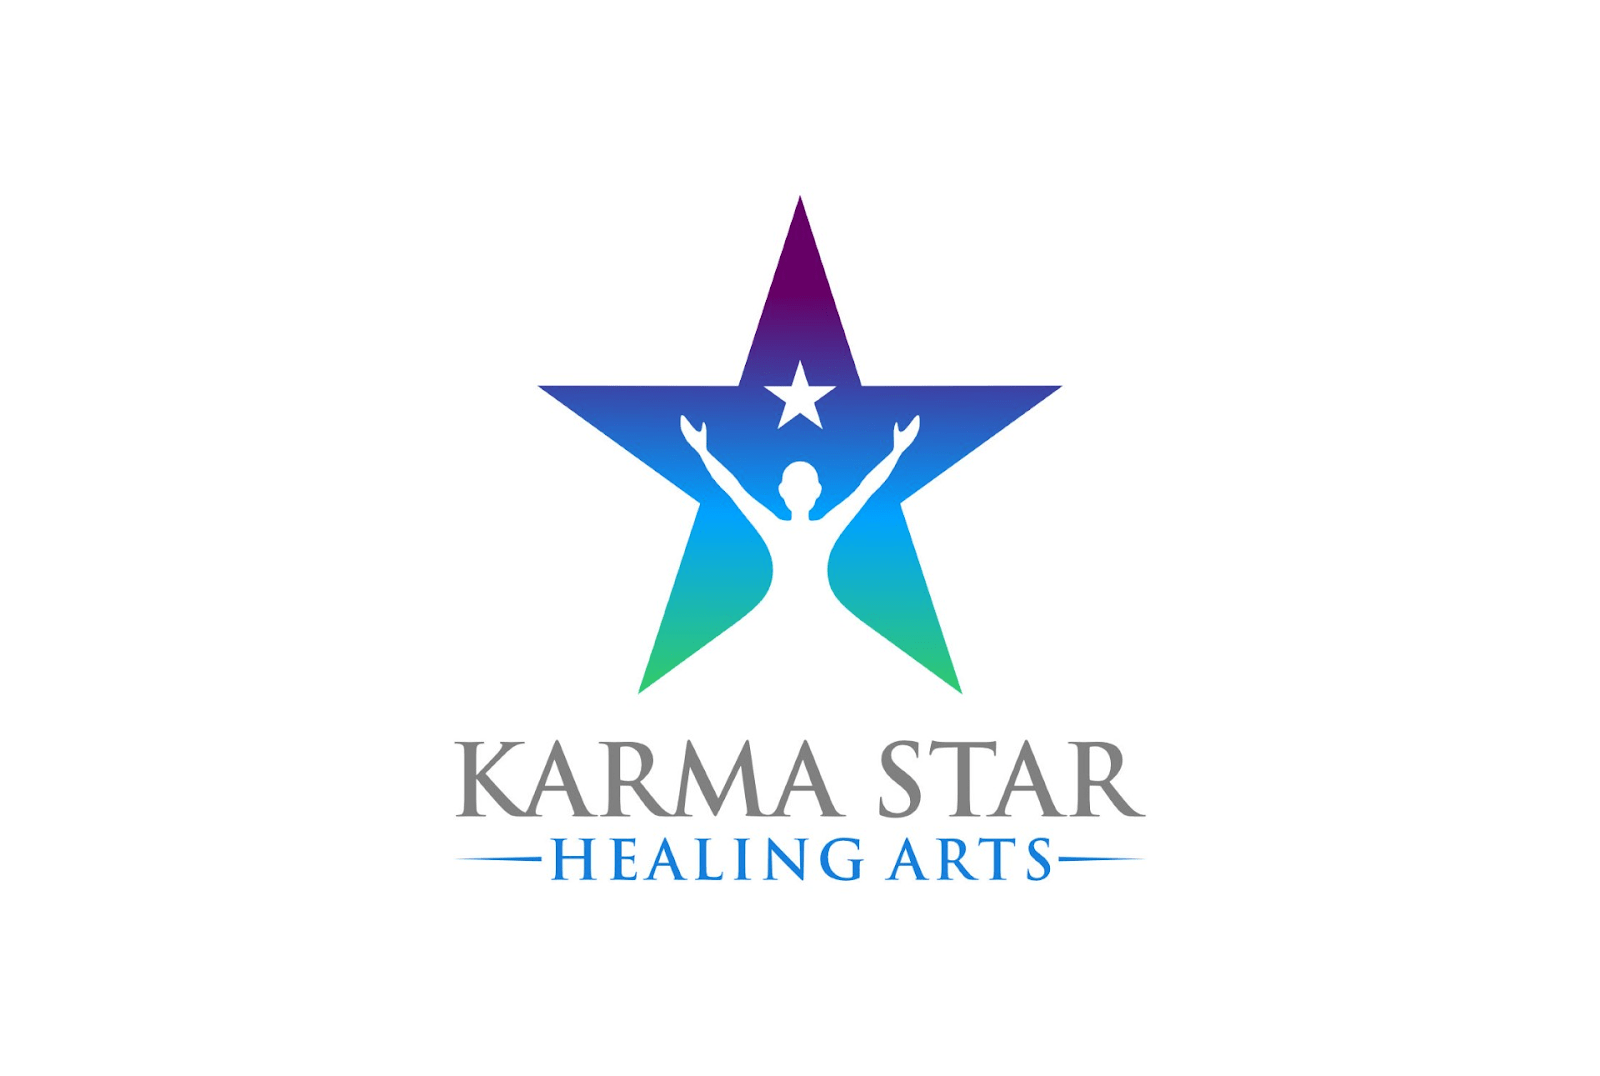 Karma Star Healing Arts, Wednesday, May 31, 2023, Press release picture